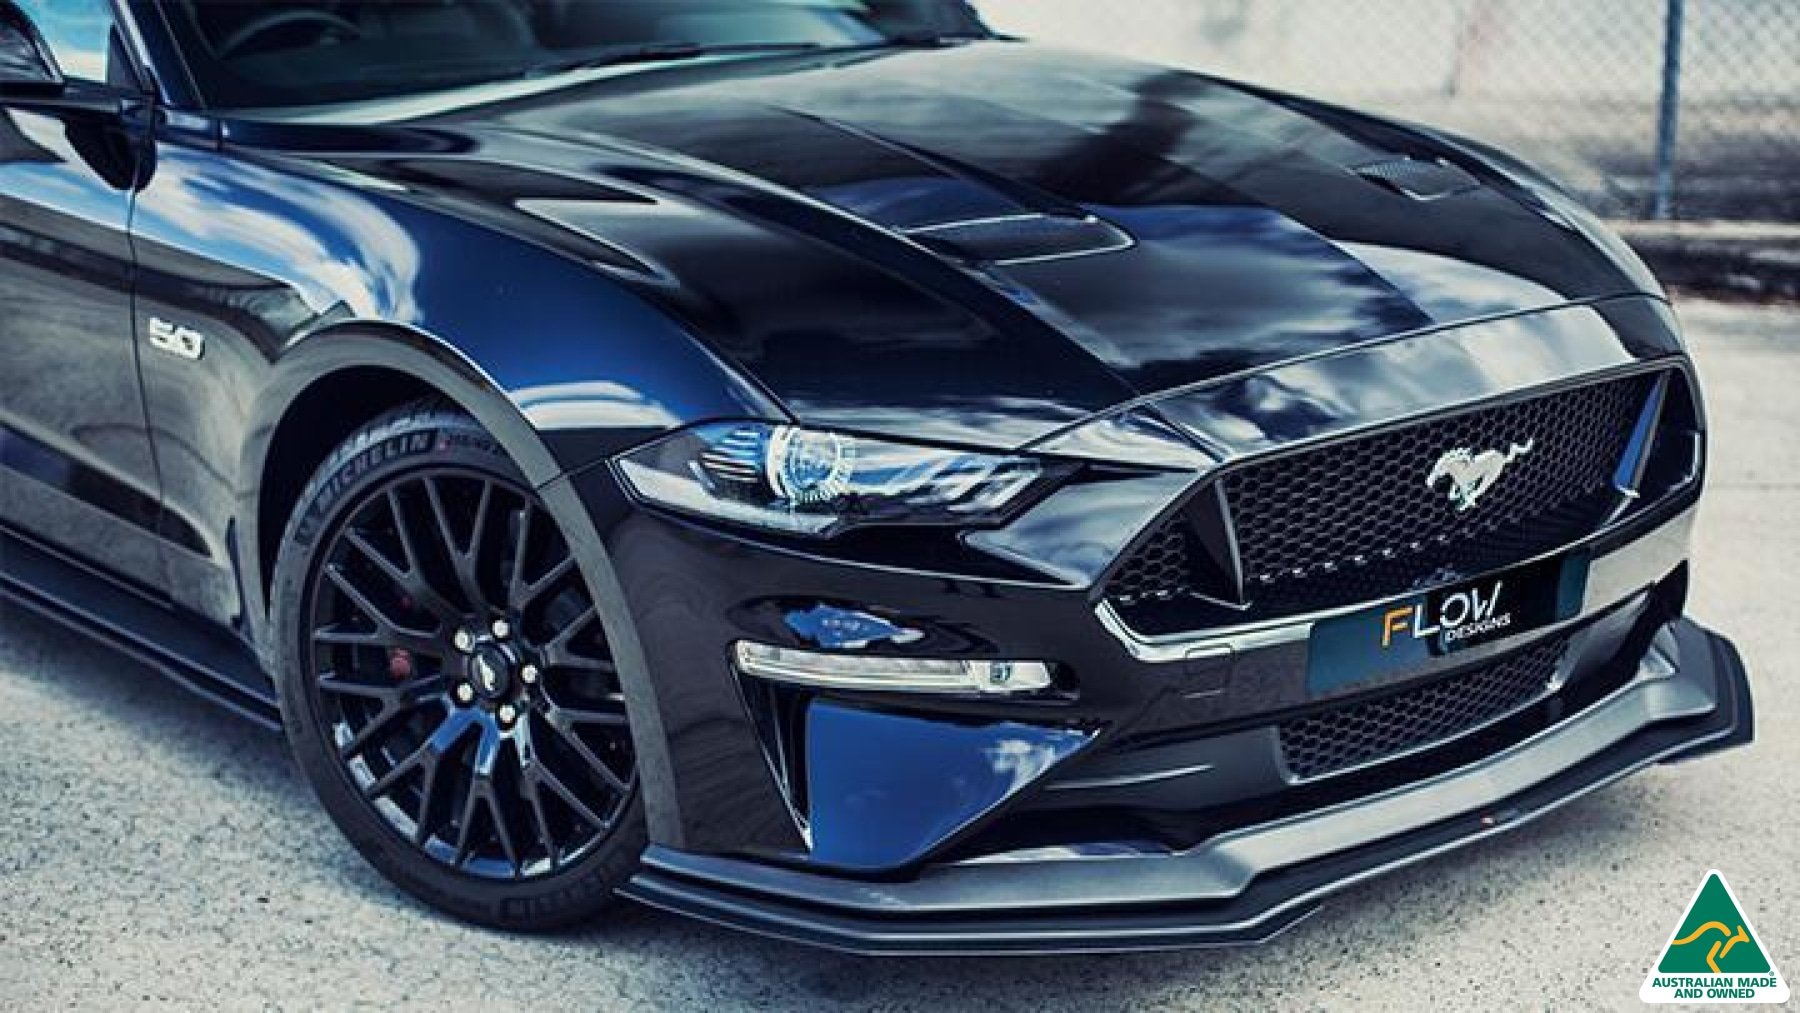 GT Mustang S550 FN Front Lip Splitter Extensions (Pair) - MODE Auto Concepts